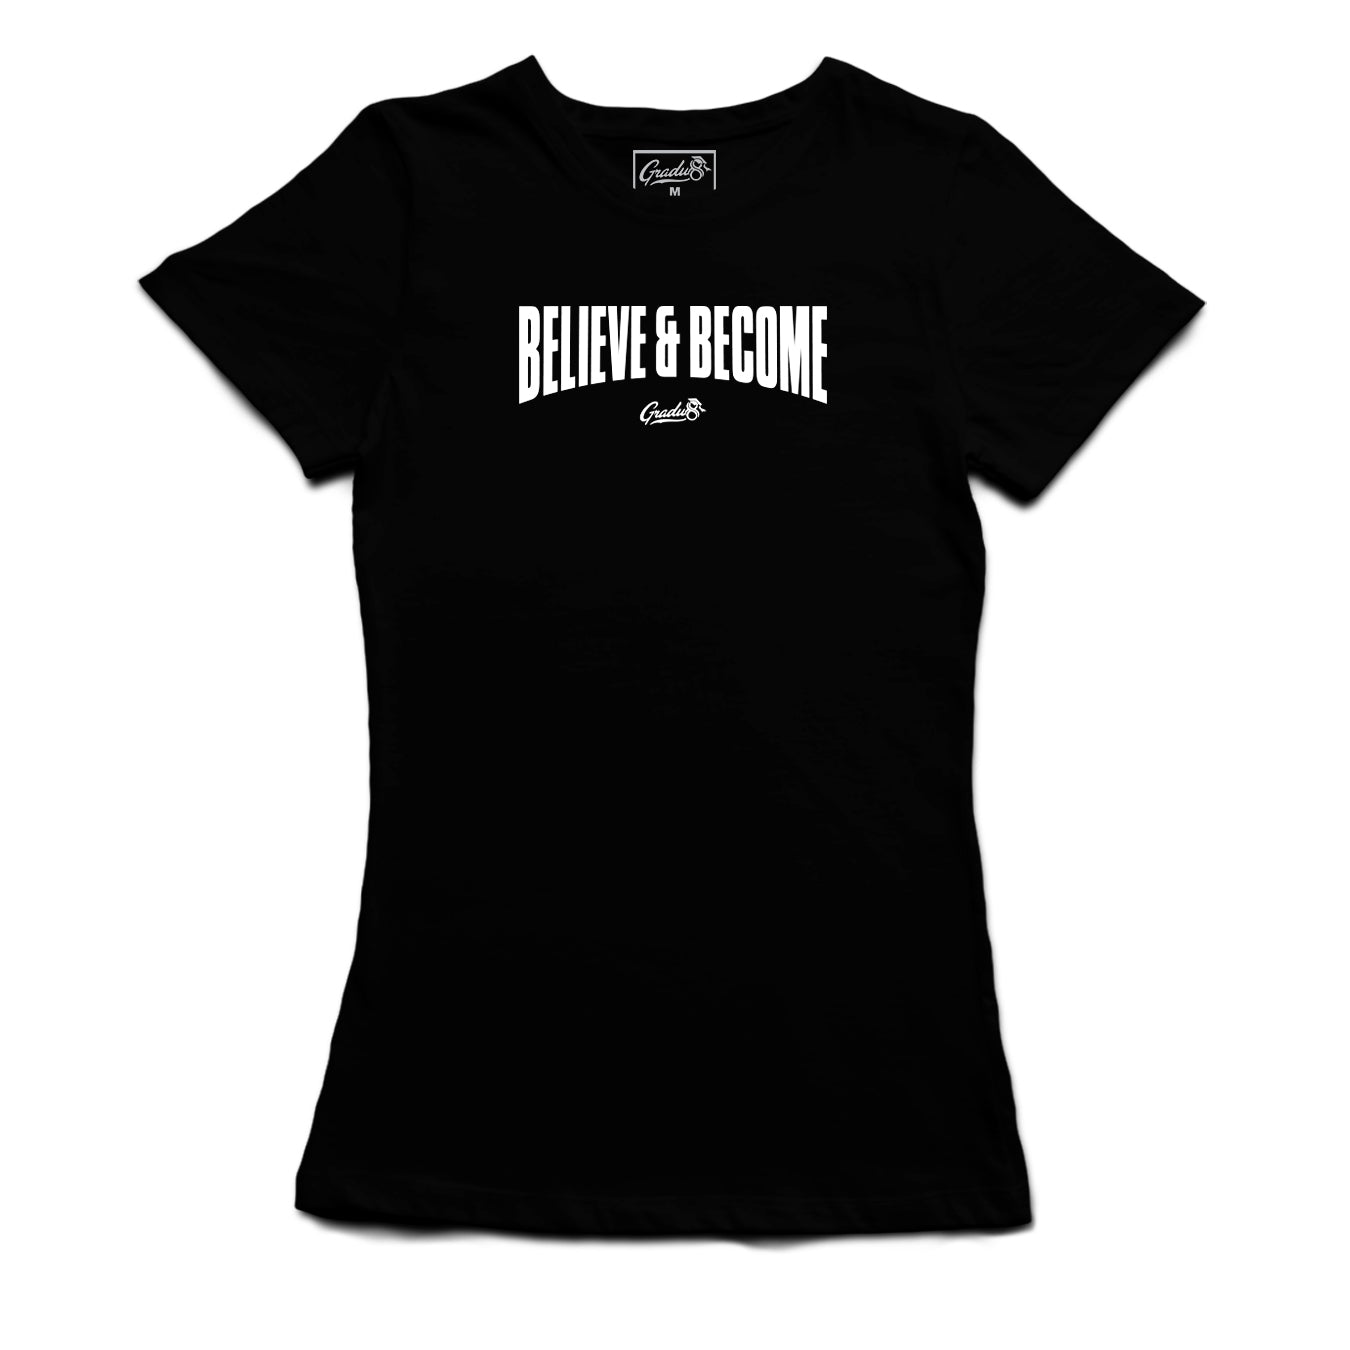 Women's' Believe & Become (Arched) Crewneck T-shirt